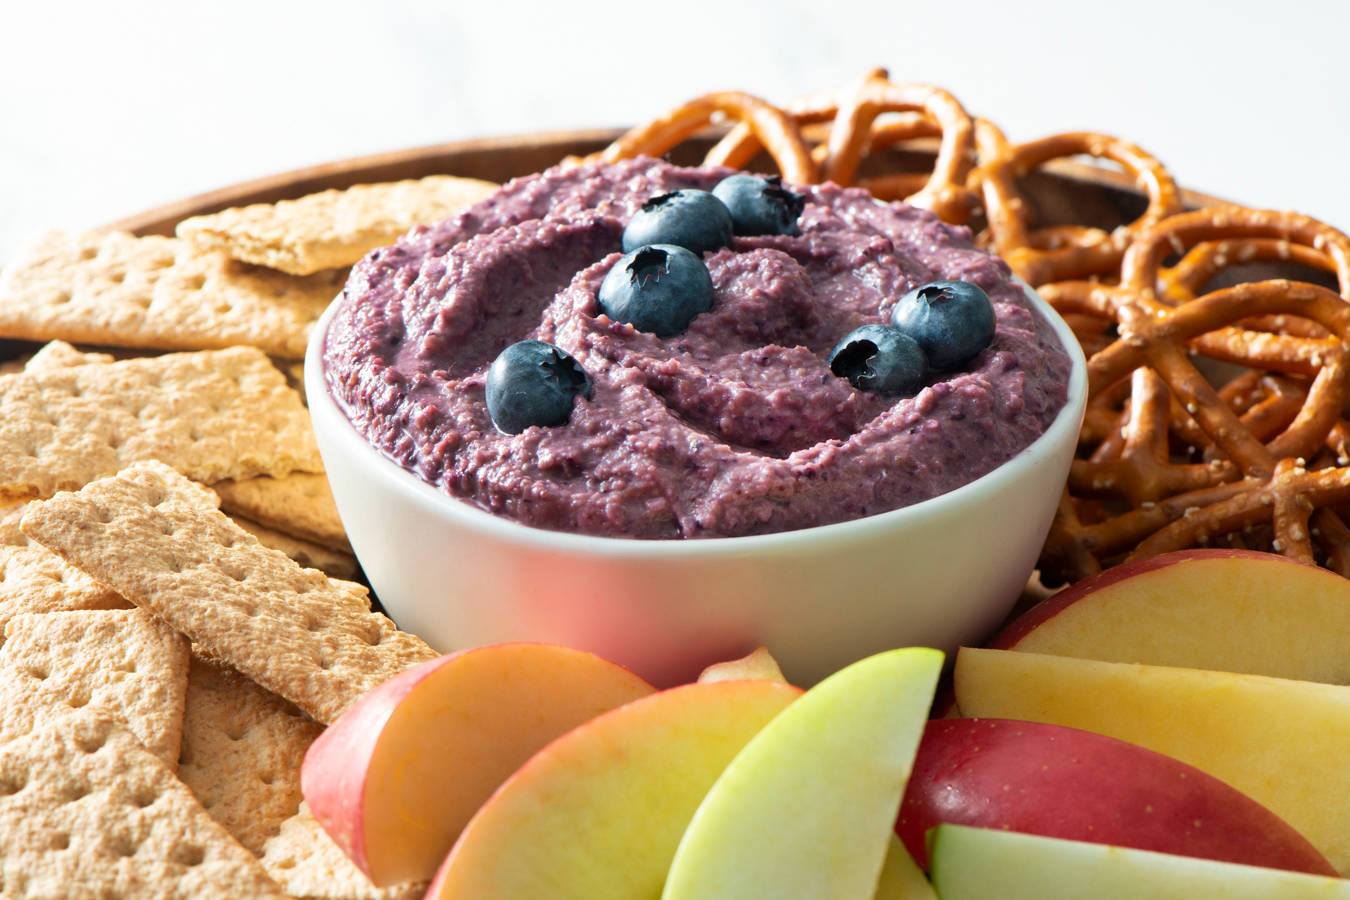 Blueberry hummus in a bowl topped with fresh blueberries, alongside crackers, fresh fruit, and pretzels.